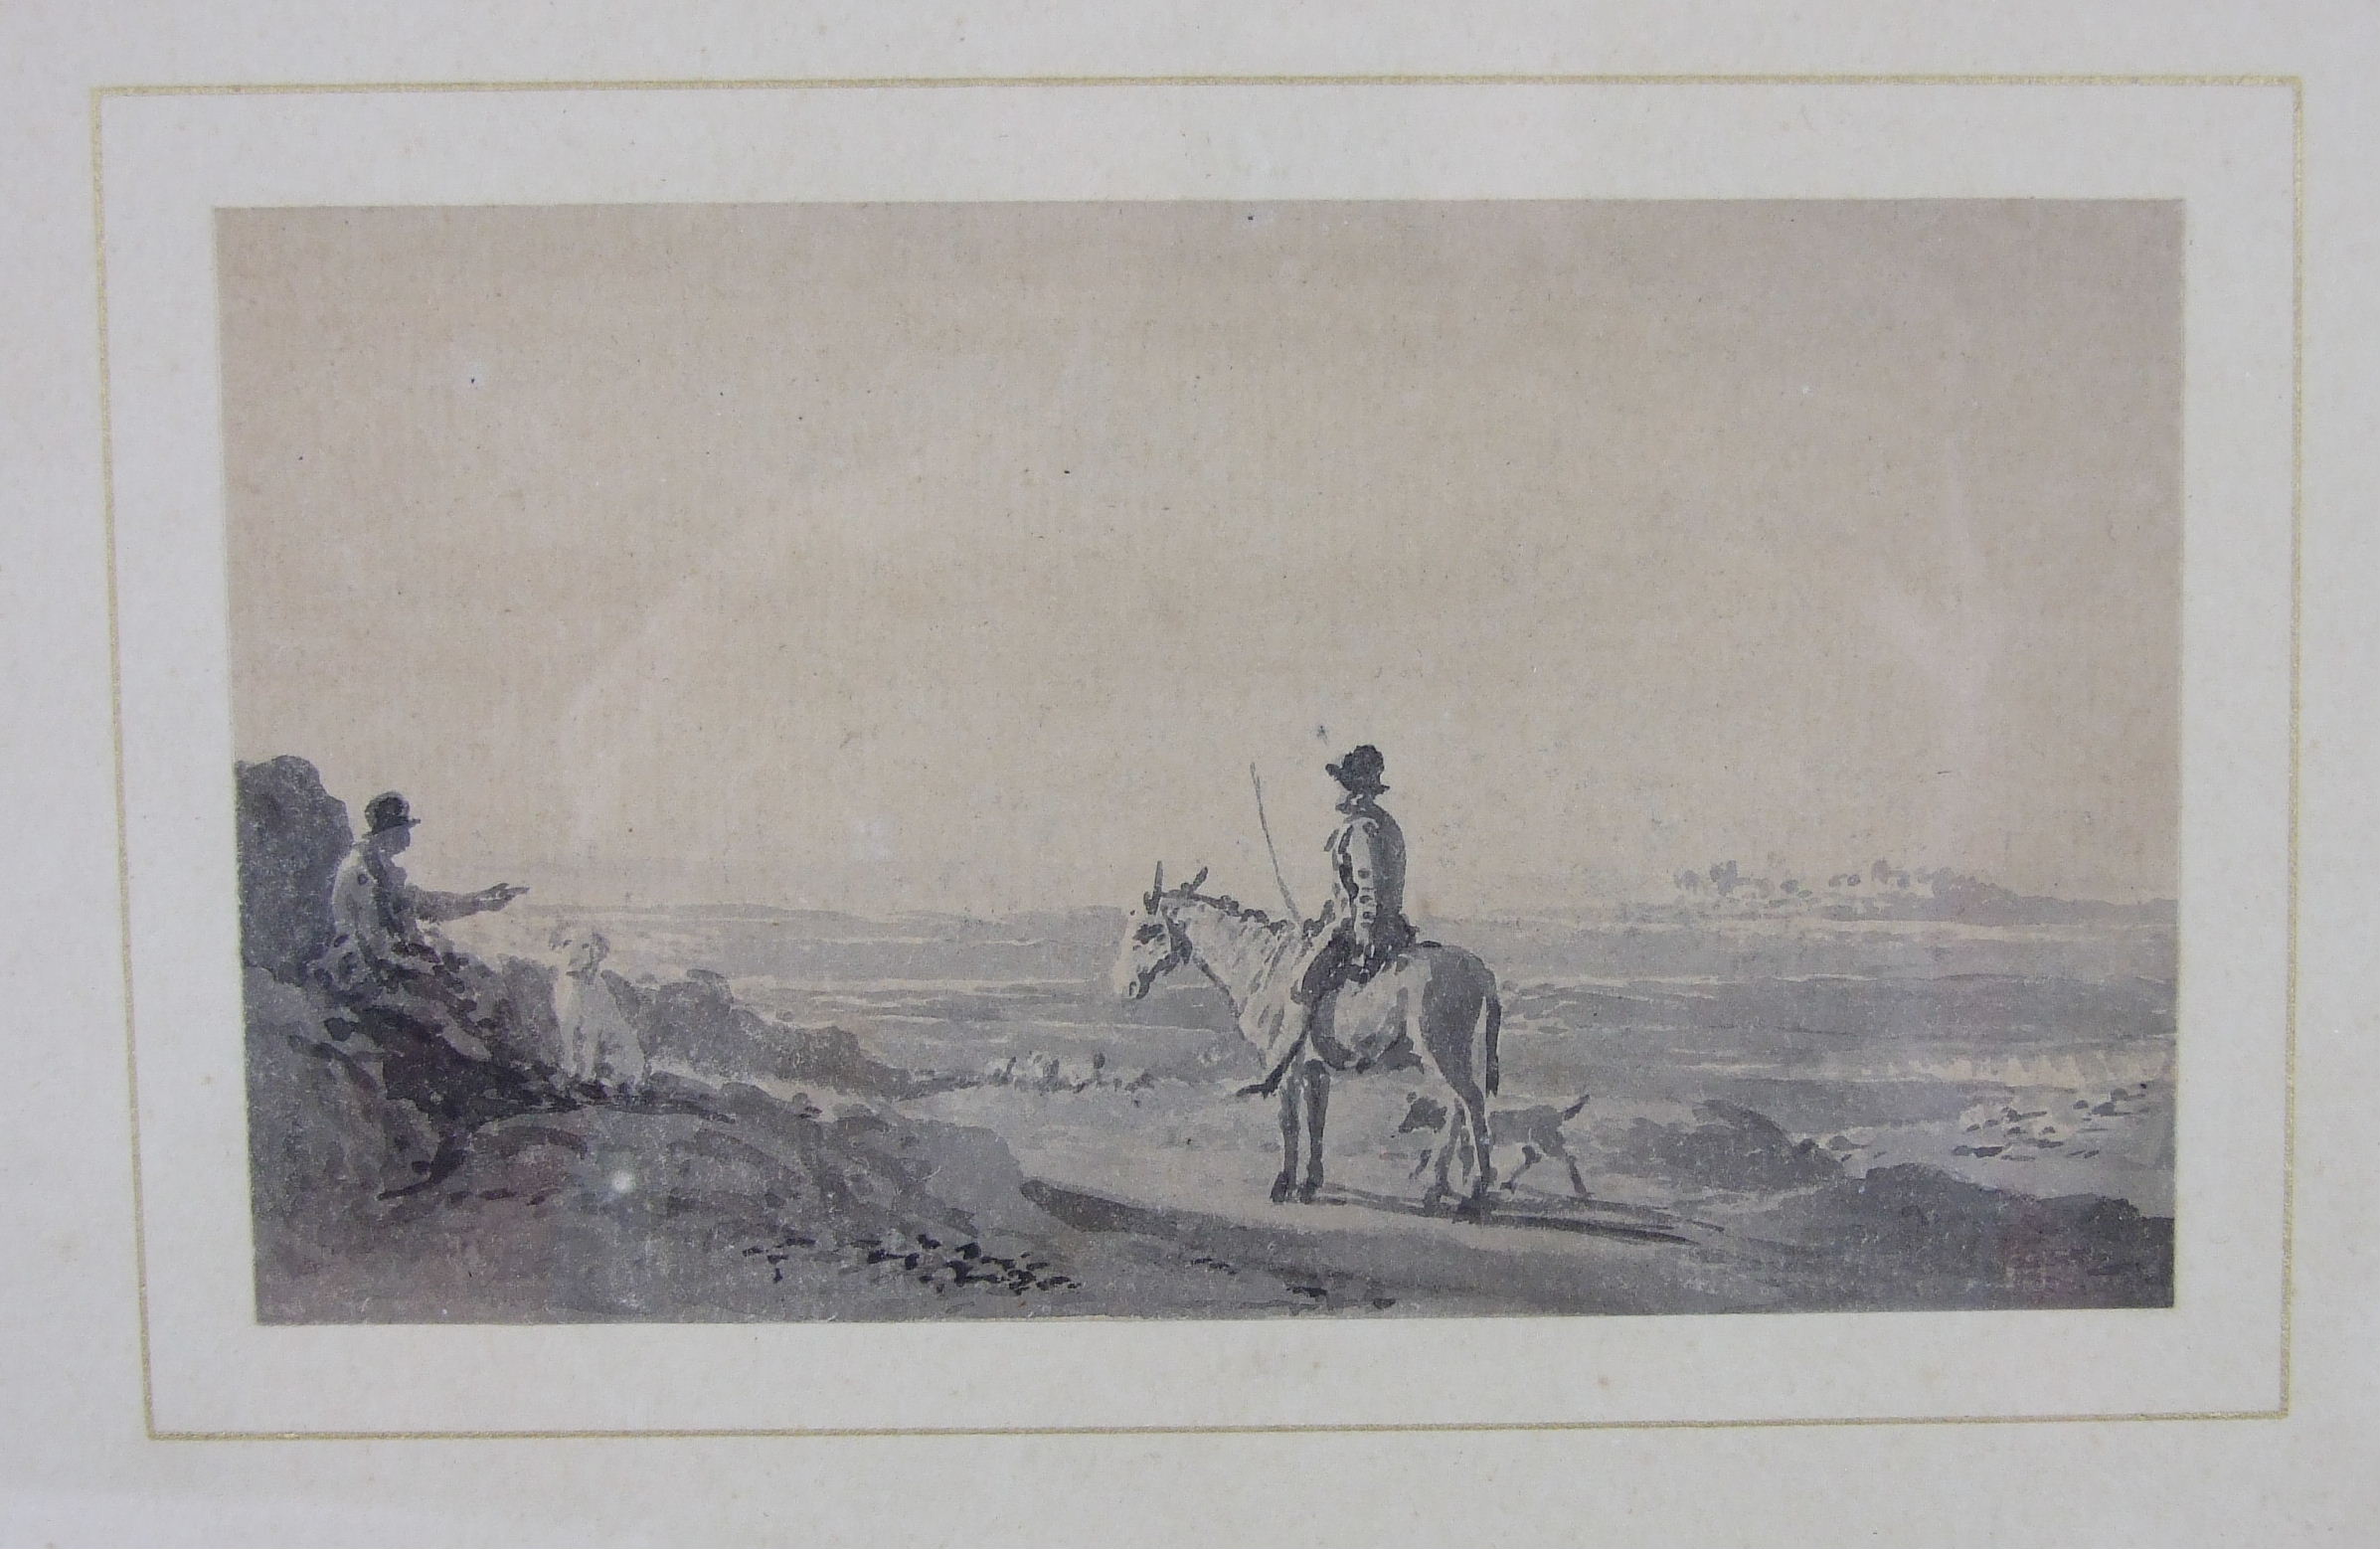 18th century English School FIGURE RIDING A DONKEY WITH A DOG BY THE ROADSIDE Unsigned monochrome - Image 2 of 2